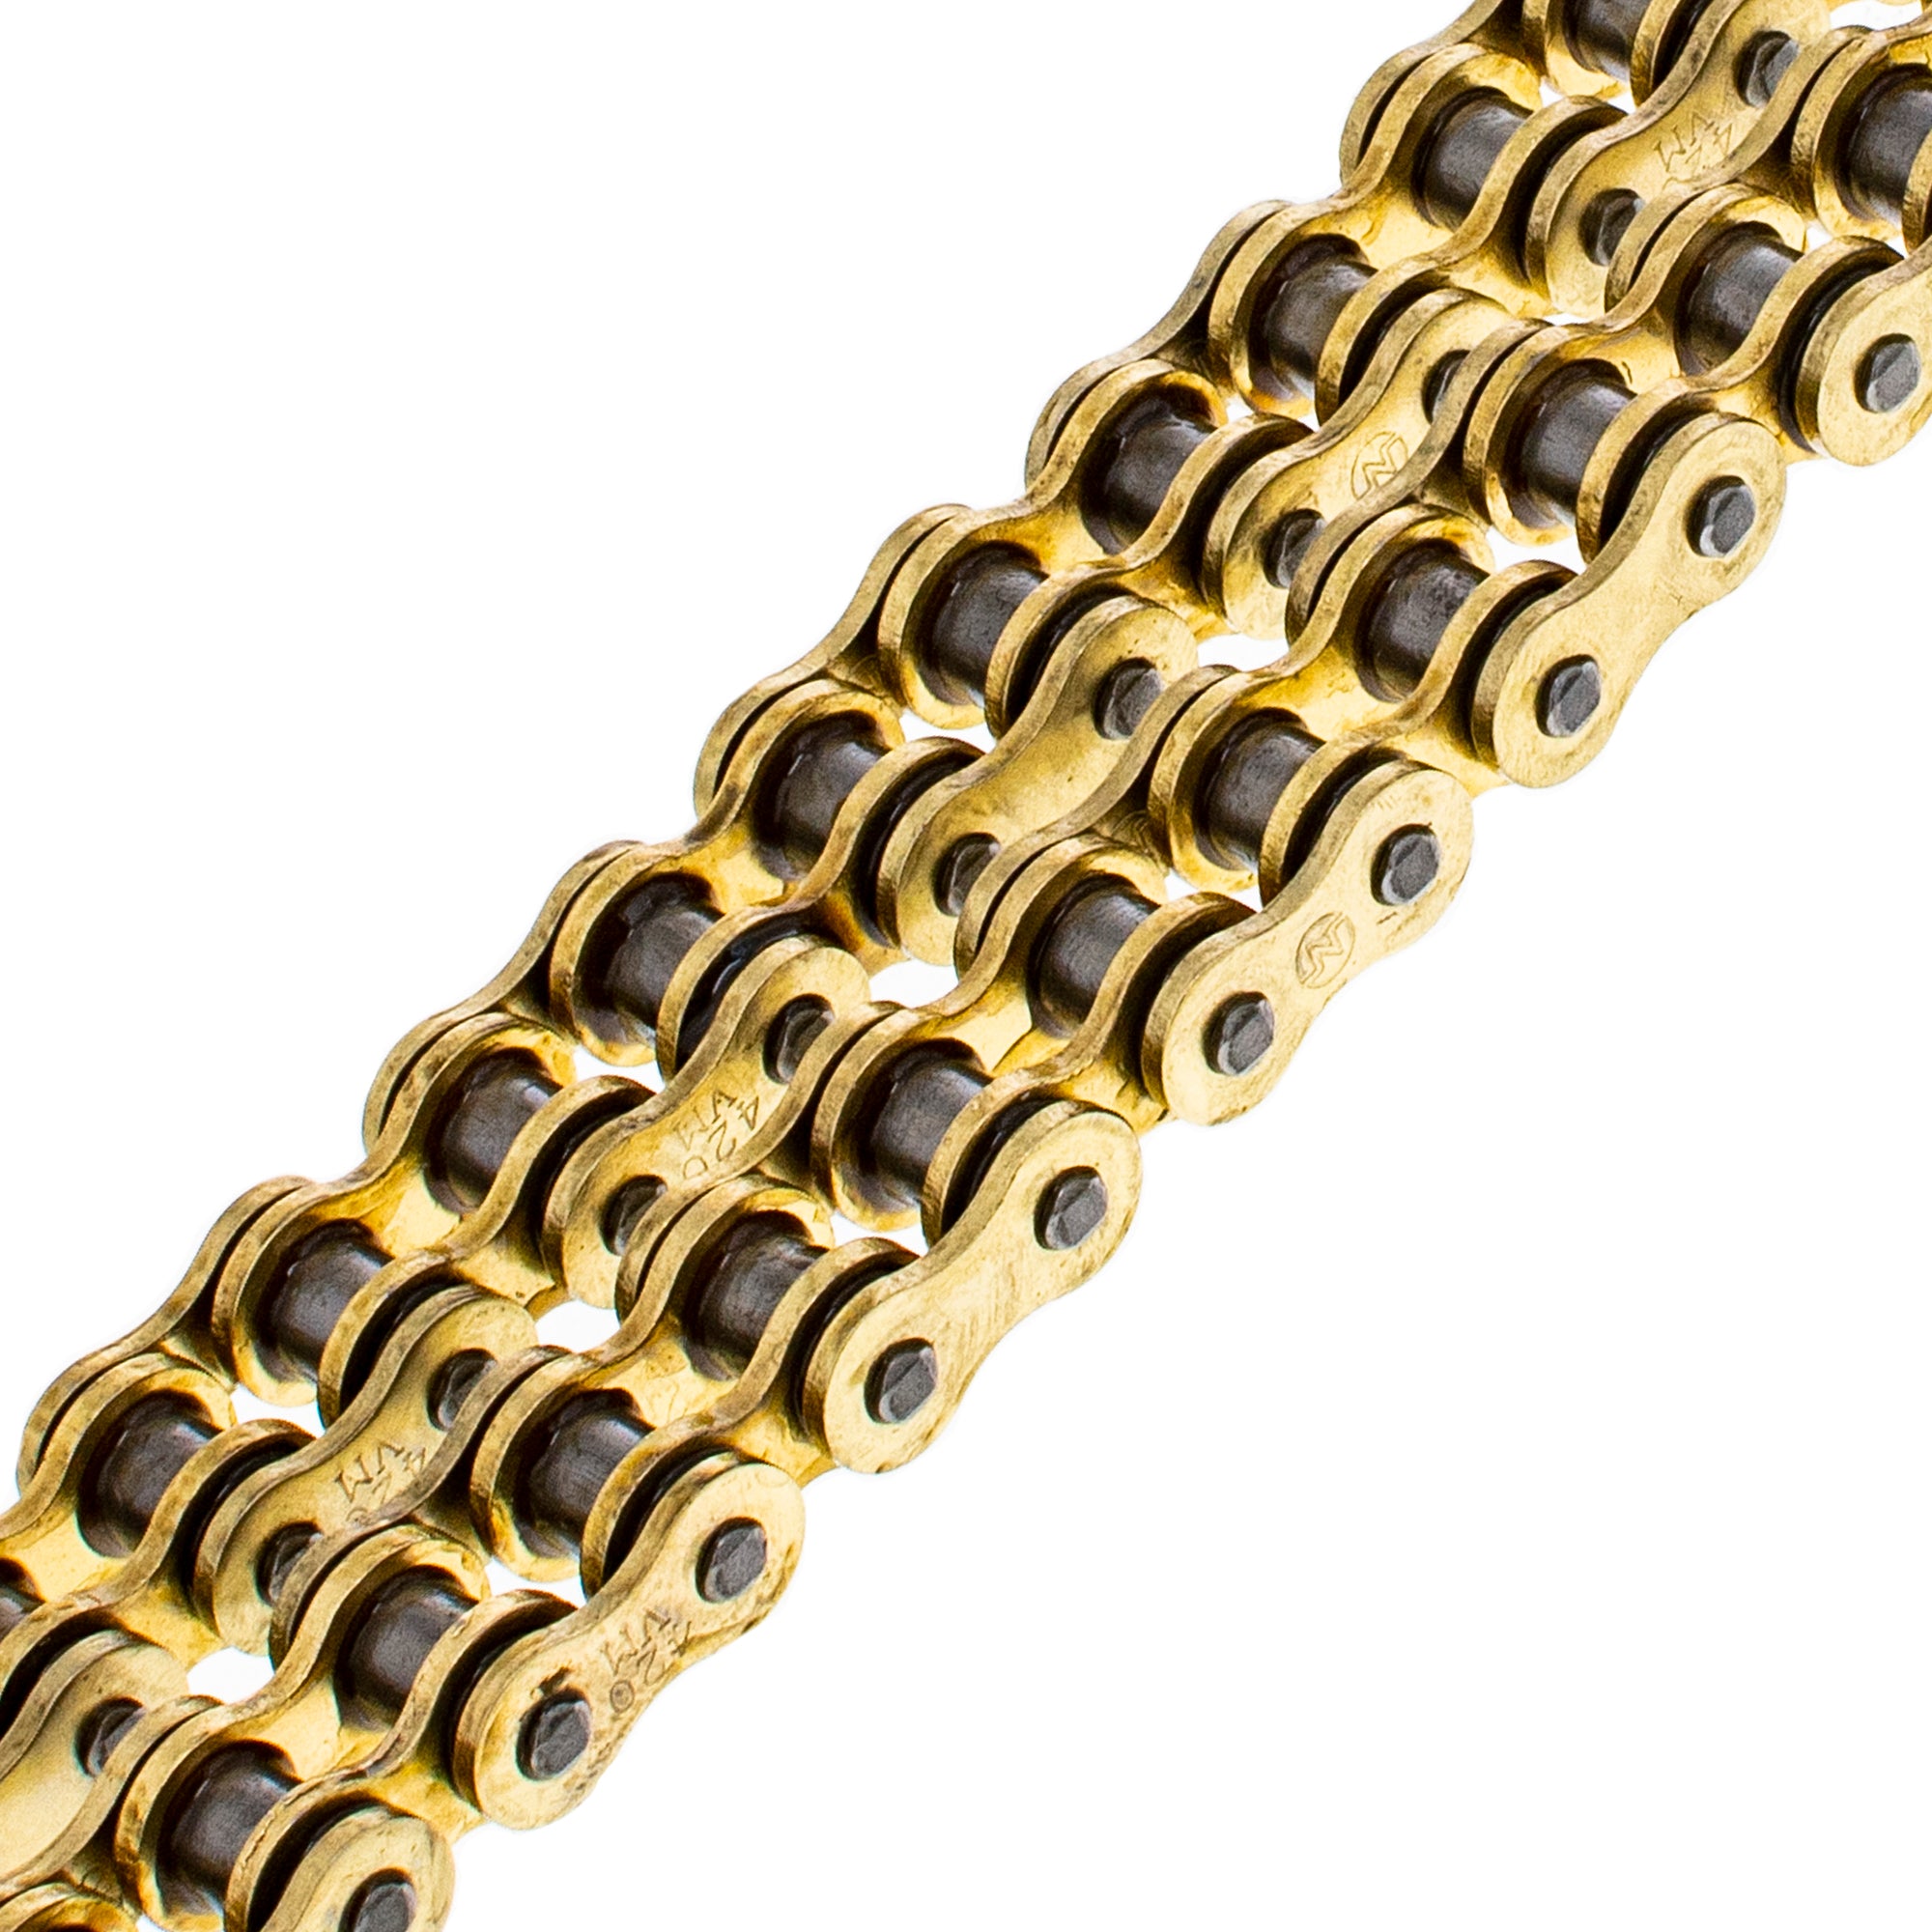 Gold X-Ring Chain 106 w/ Master Link for zOTHER Honda XR80R Super MB5 GT80 405W3-GN1-505 NICHE 519-CDC2586H